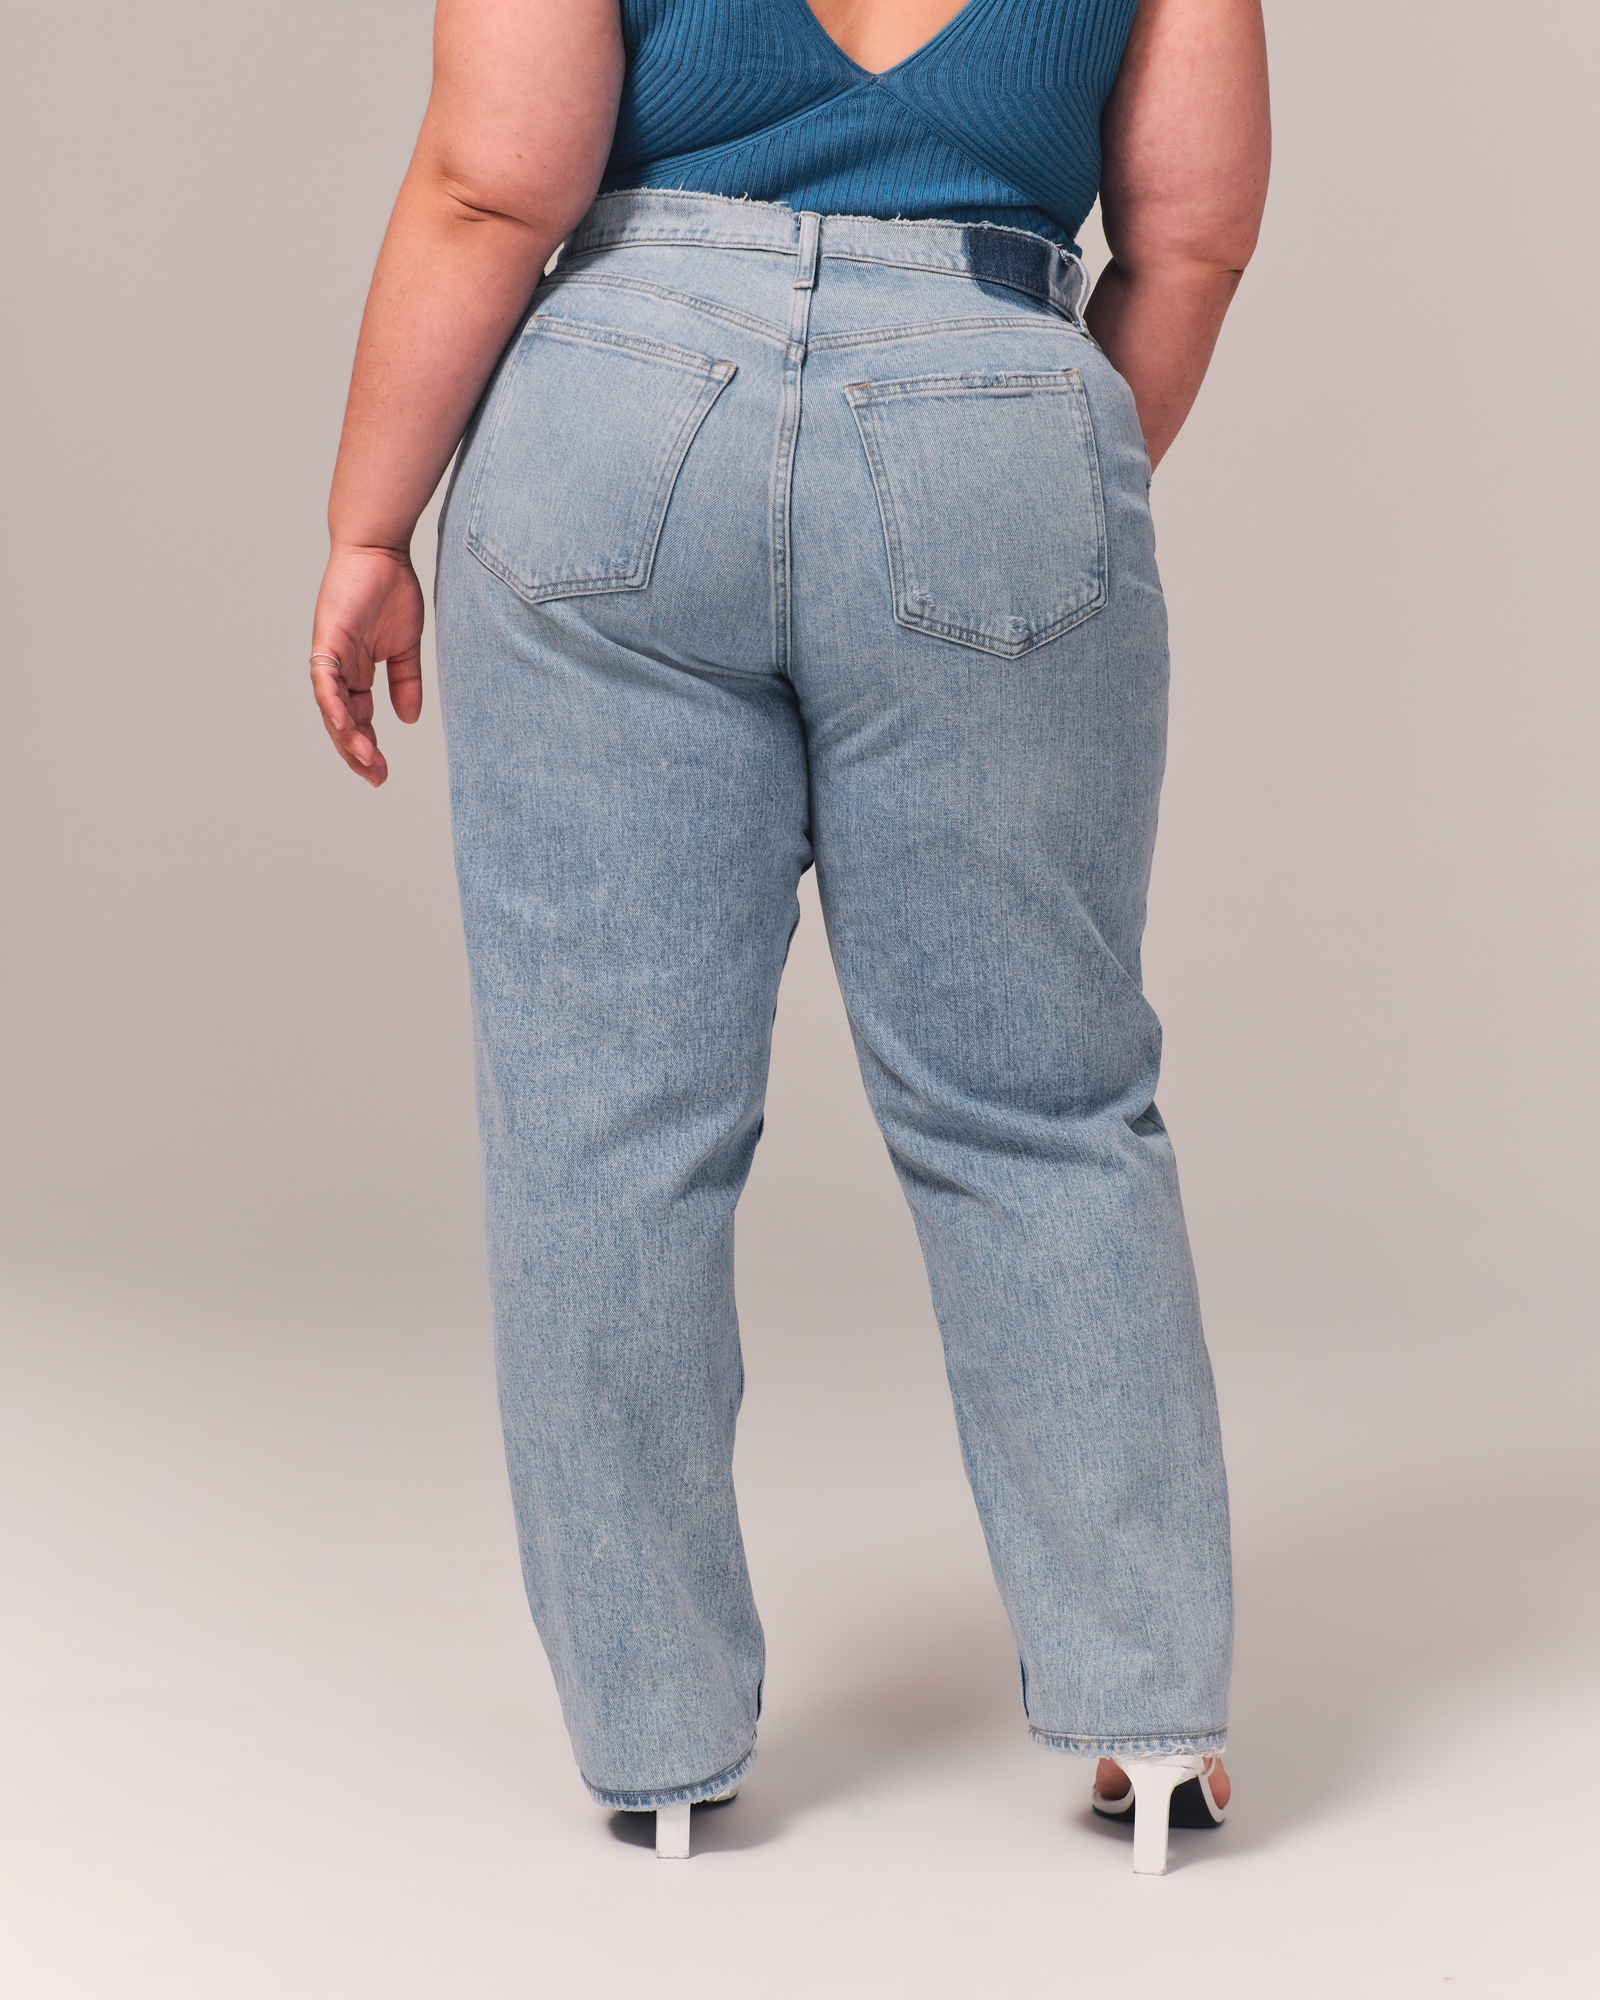 My Favorite Plus Size Jeans From Abercrombie - lolo russell